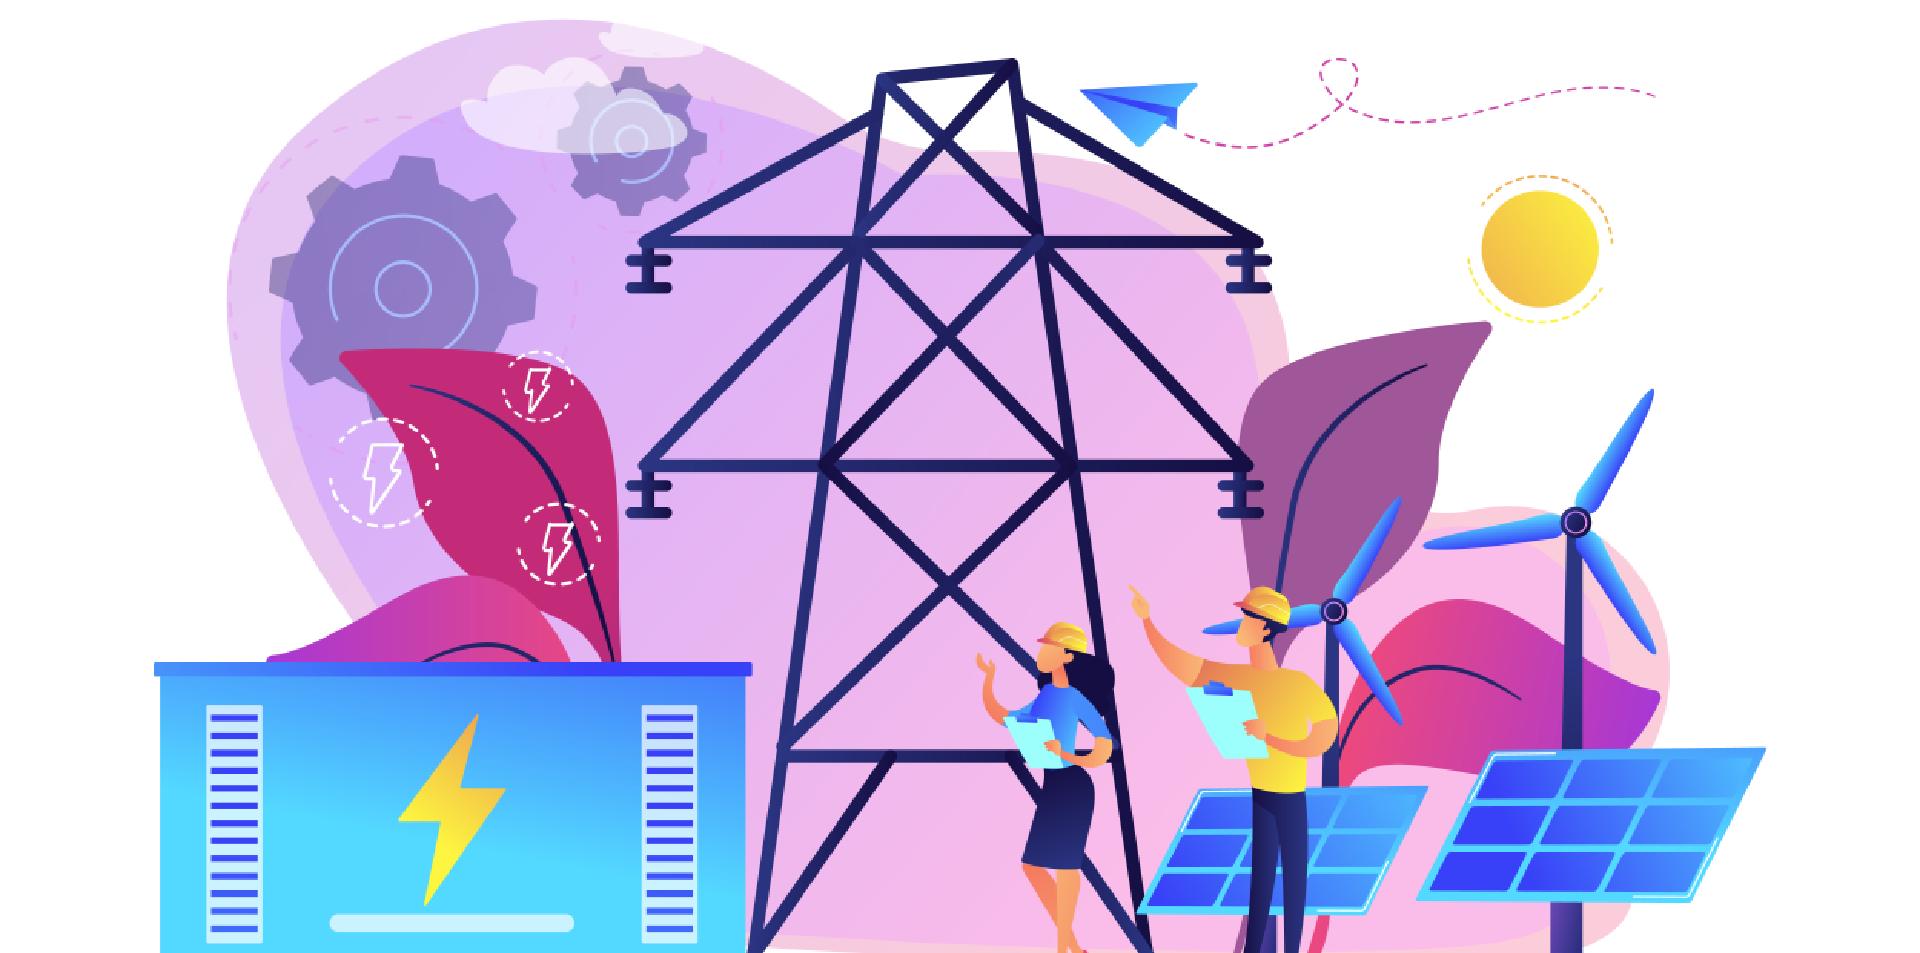 National Grid Looks machine learning will improve the utility business of the future